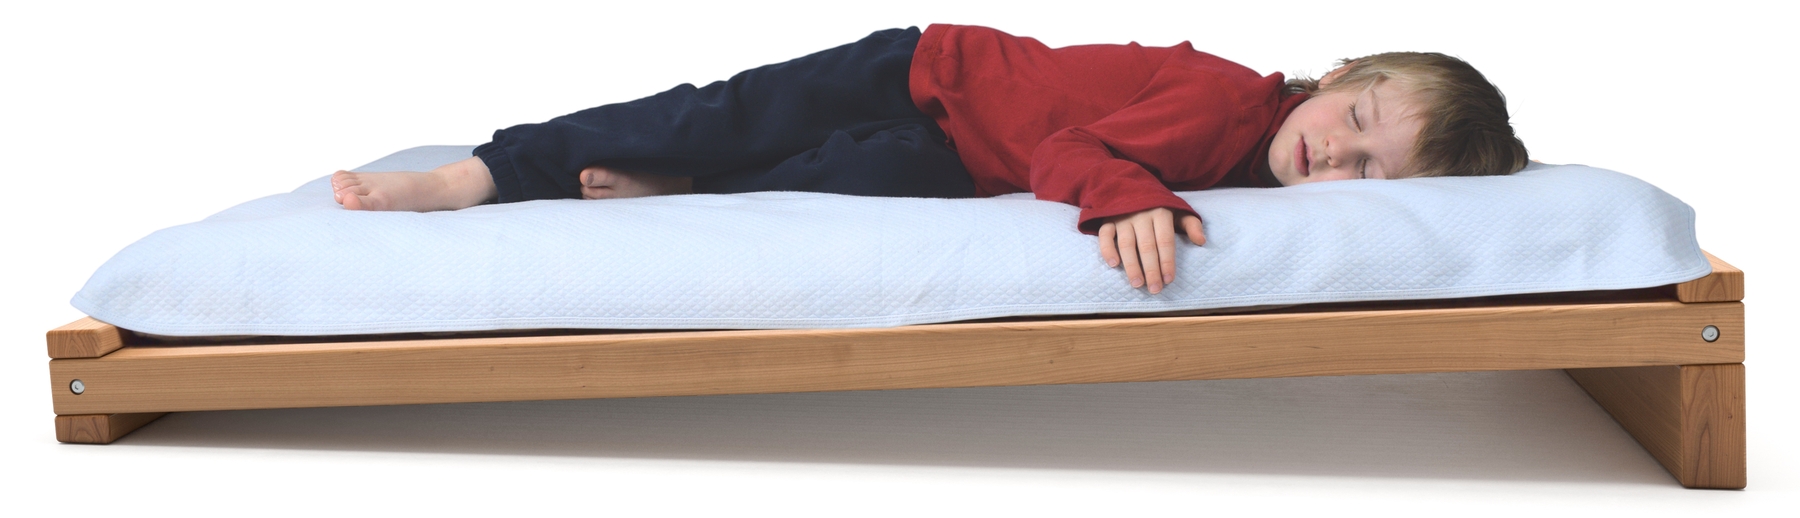 Boy sleeping on an inclined Montessori toddler bed